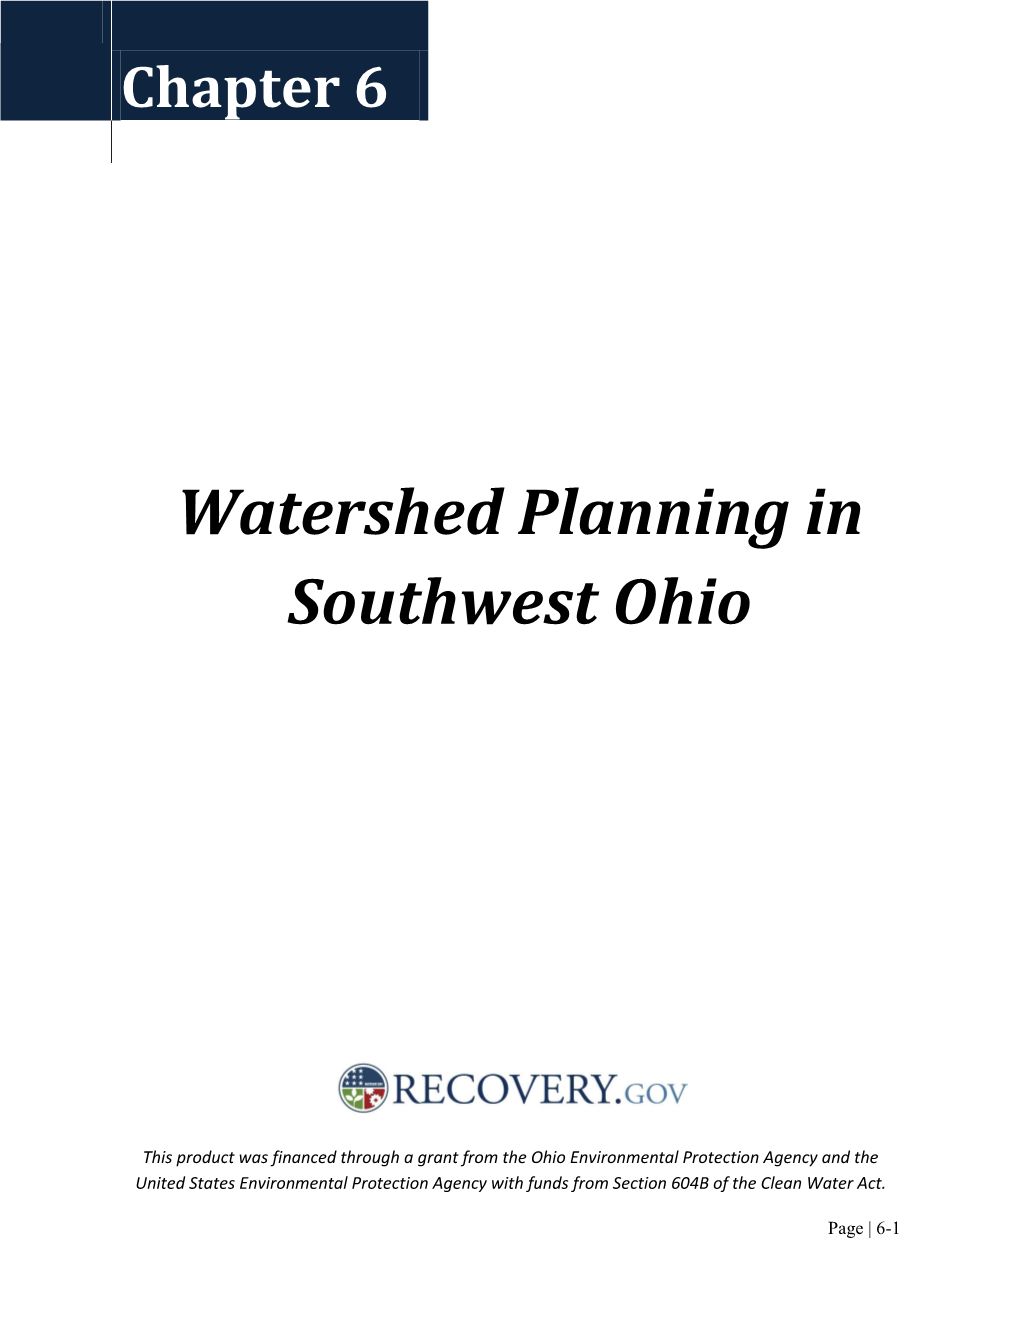 Watershed Planning in Southwest Ohio